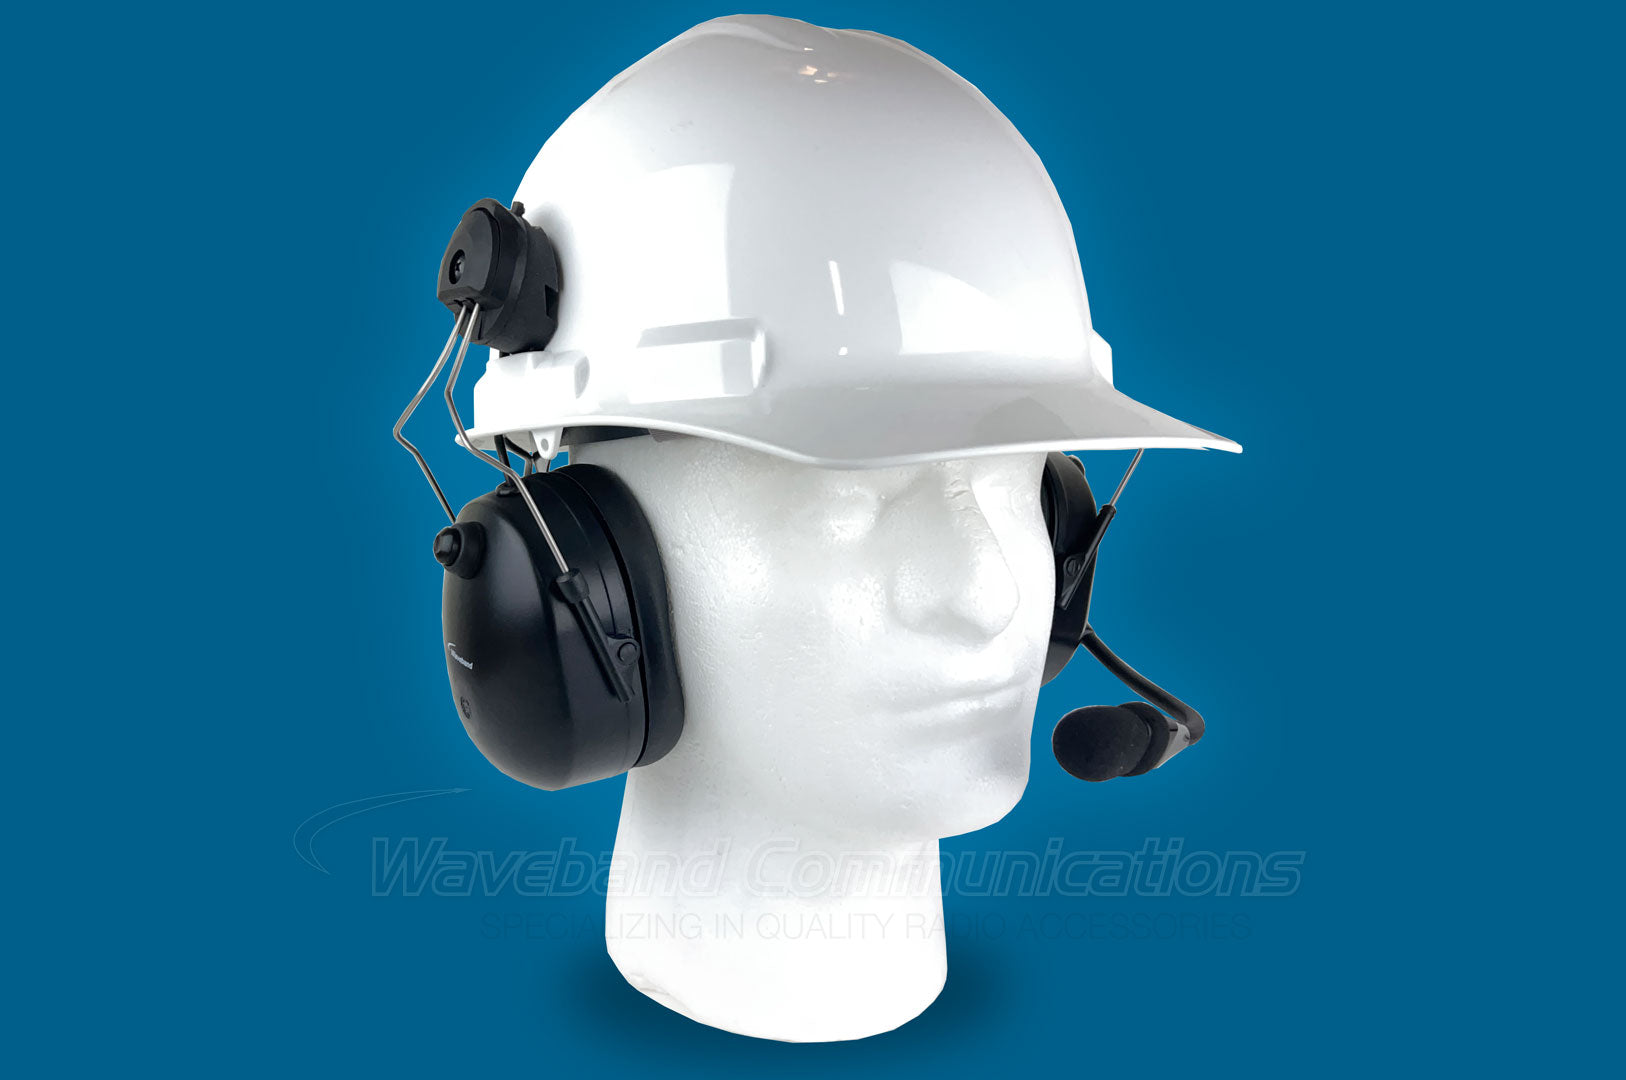 Heavy Duty Noise Canceling Headset with Hardhat/Helmet Attachment